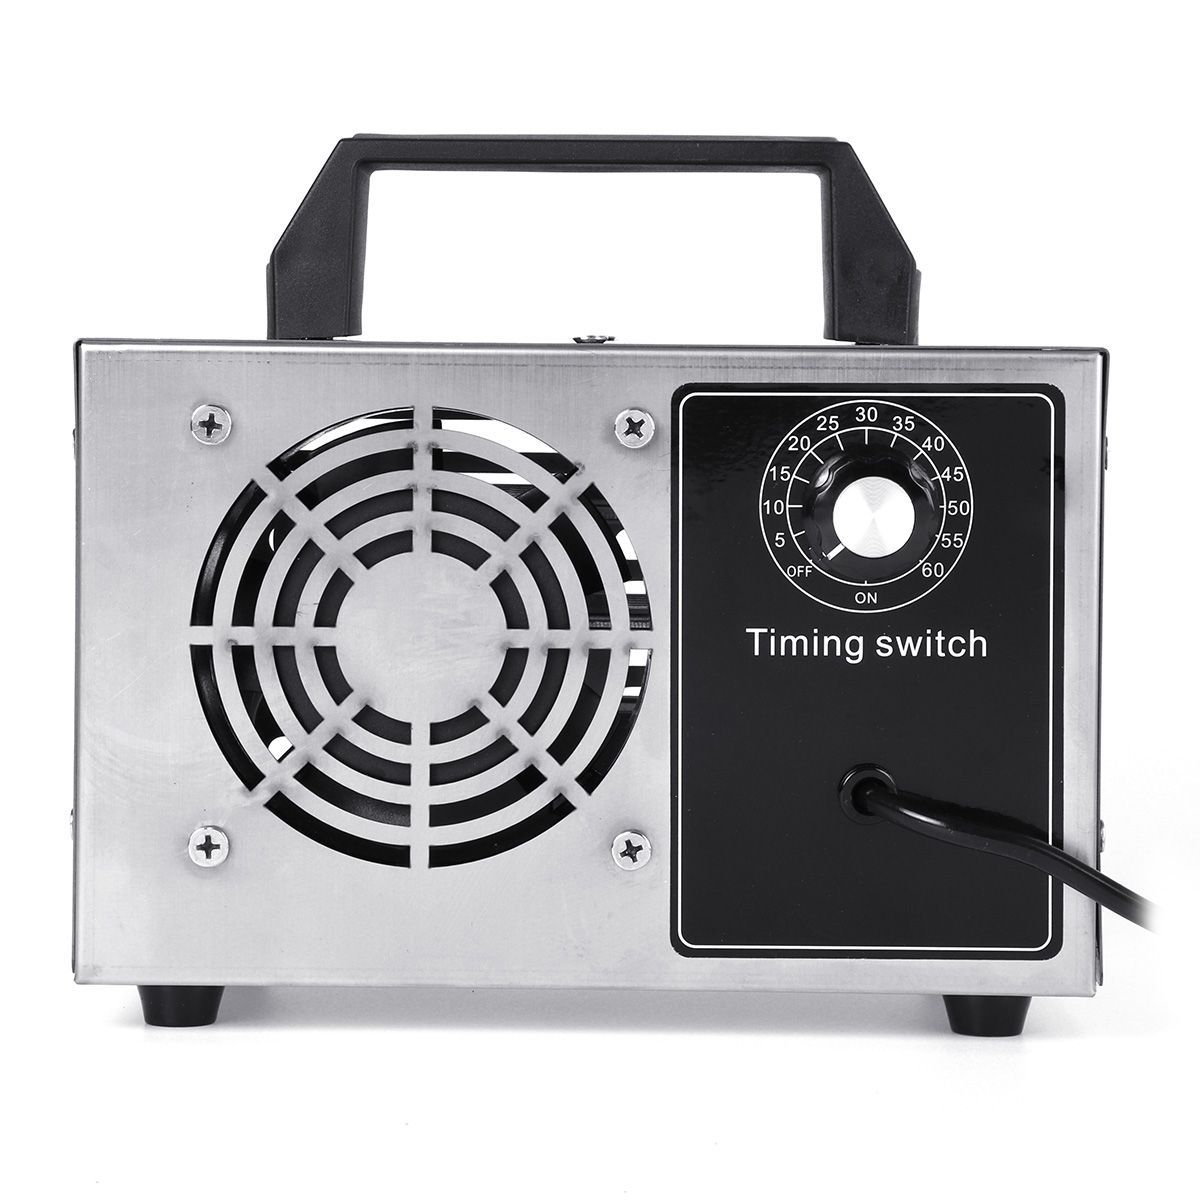 220V-Ozone-Generator-Commercial-Long-Life-Timing-Purifier-Air-Cleaner-Deodorizer-1710921